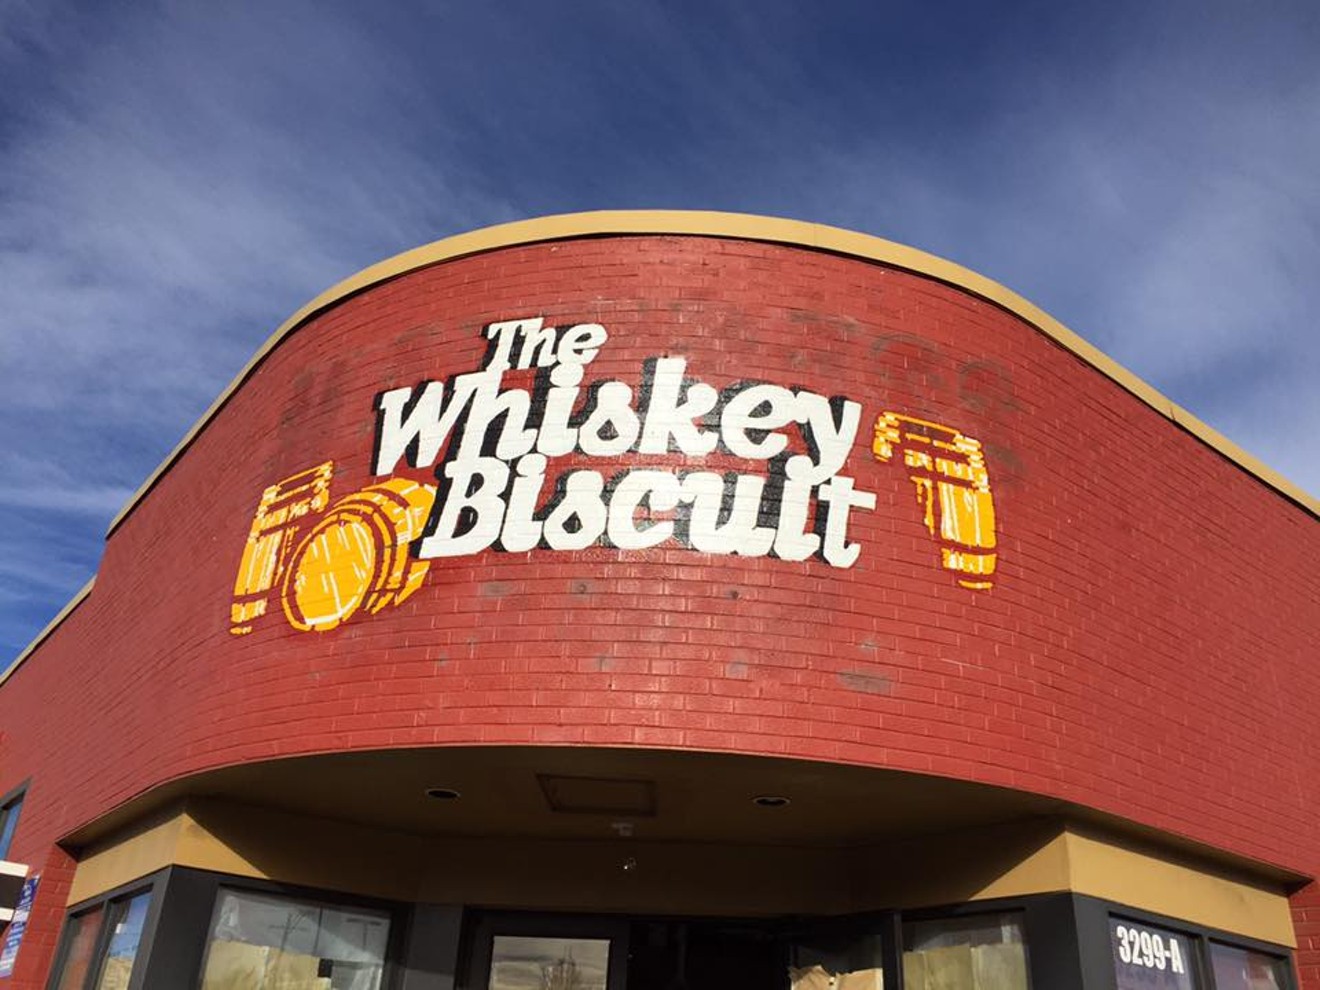 Whiskey and biscuits are now being served on South Broadway.